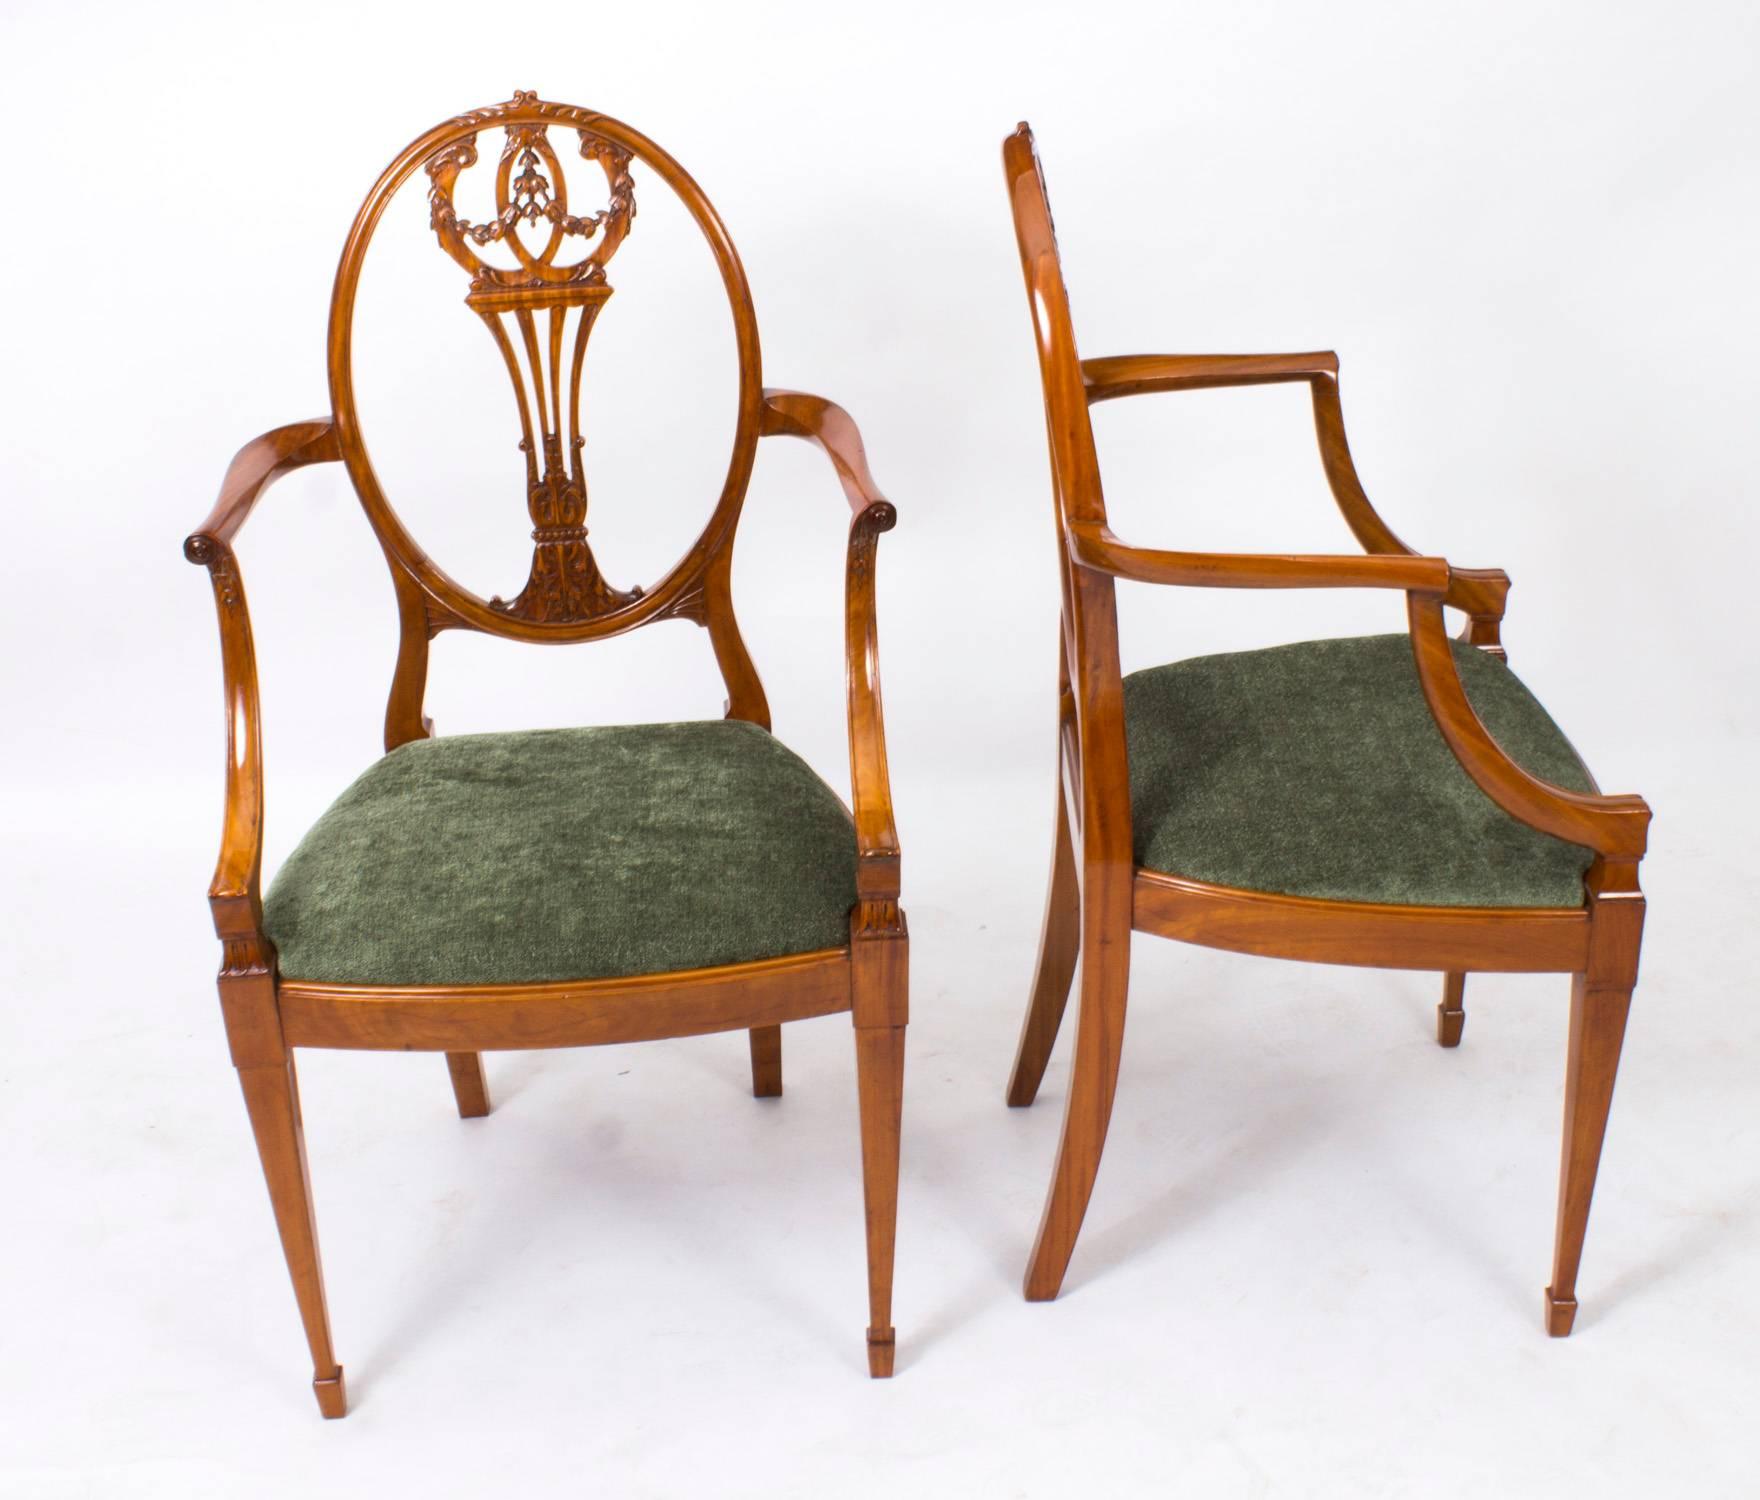 This is a fantastic antique pair of English Victorian Sheraton Revival satinwood armchairs, circa 1870 in date.

They are both expertly carved out of solid satinwood, each with Federal oval shield shaped central cartouches, decorated with ribbon